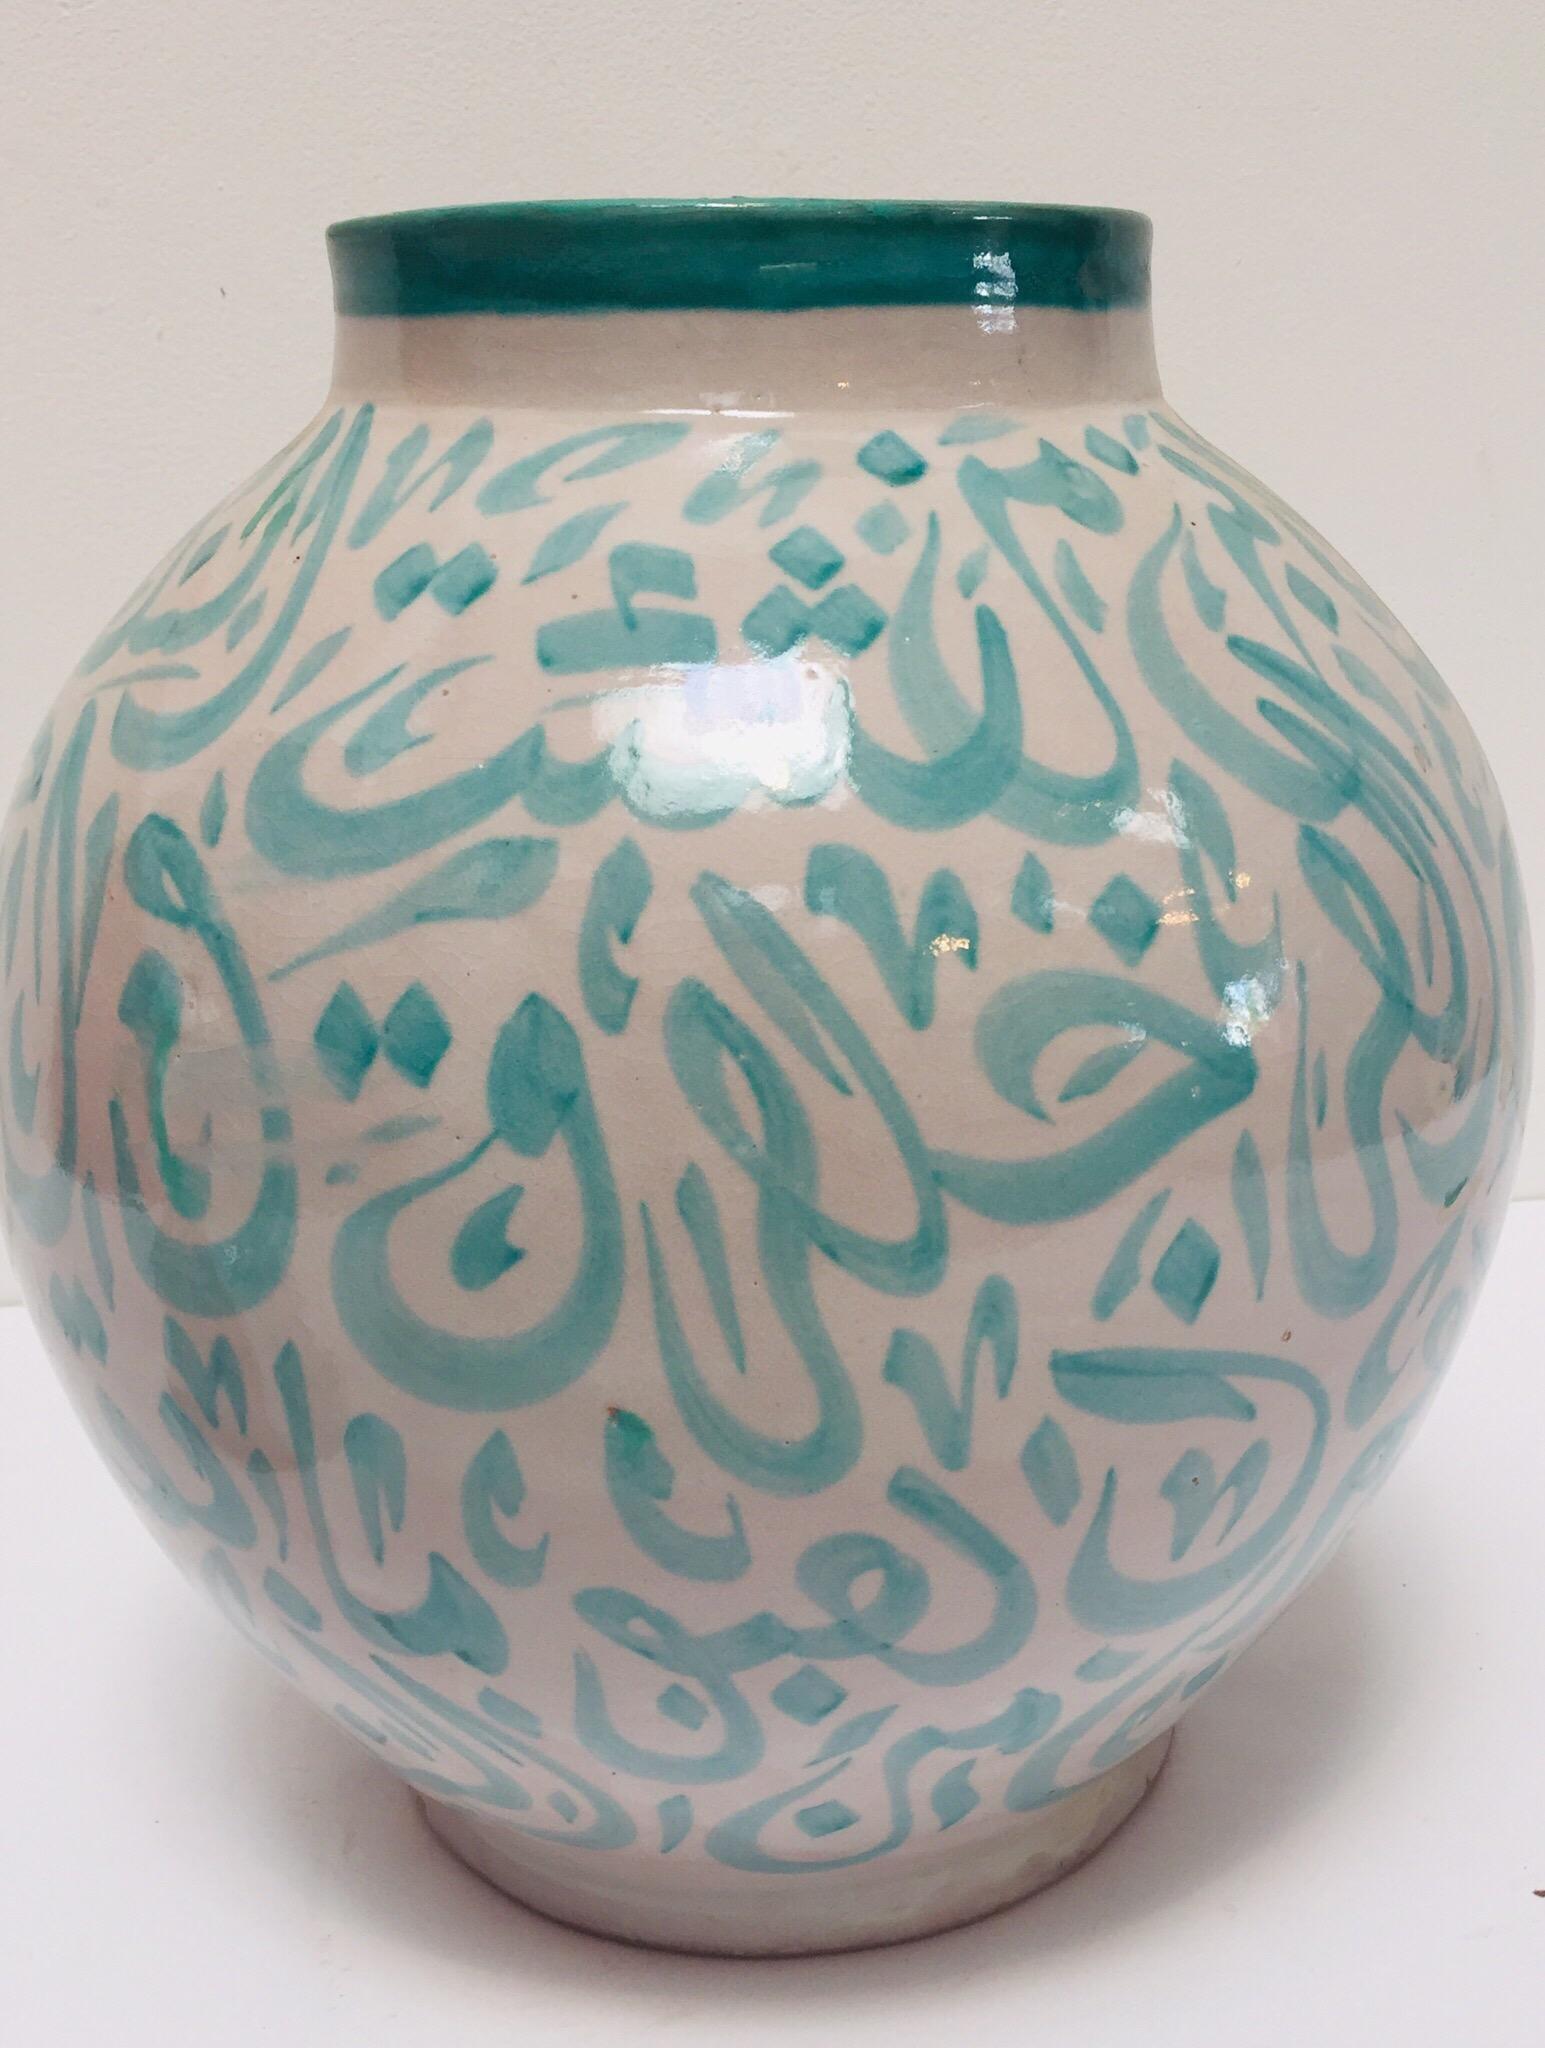 Moroccan Ceramic Lidded Urn from Fez with Arabic Calligraphy Lettrism Writing 10